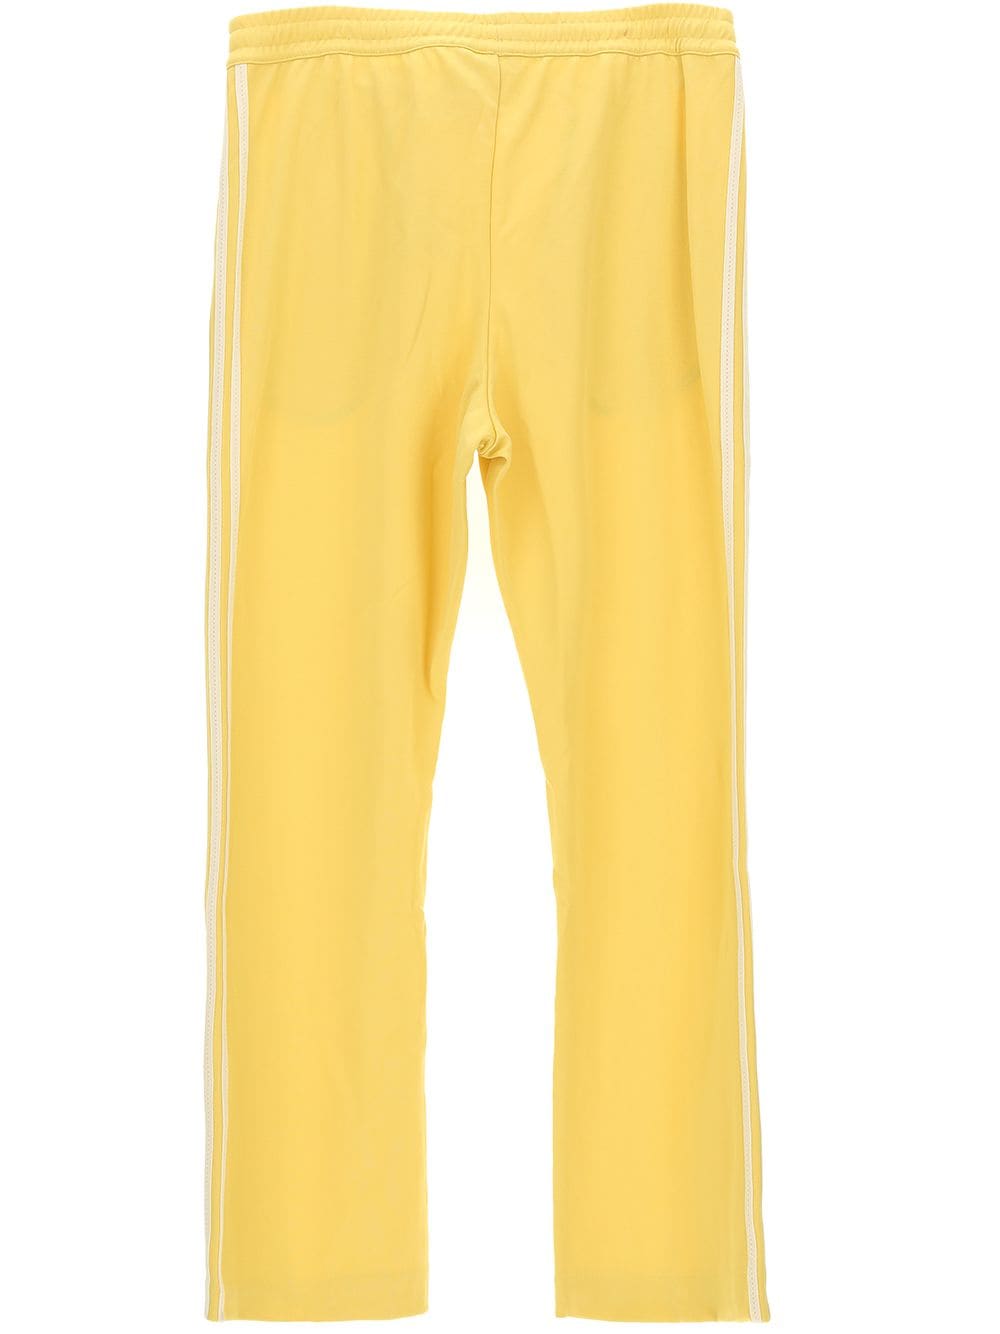 citron yellow/white recycled polyester trousers